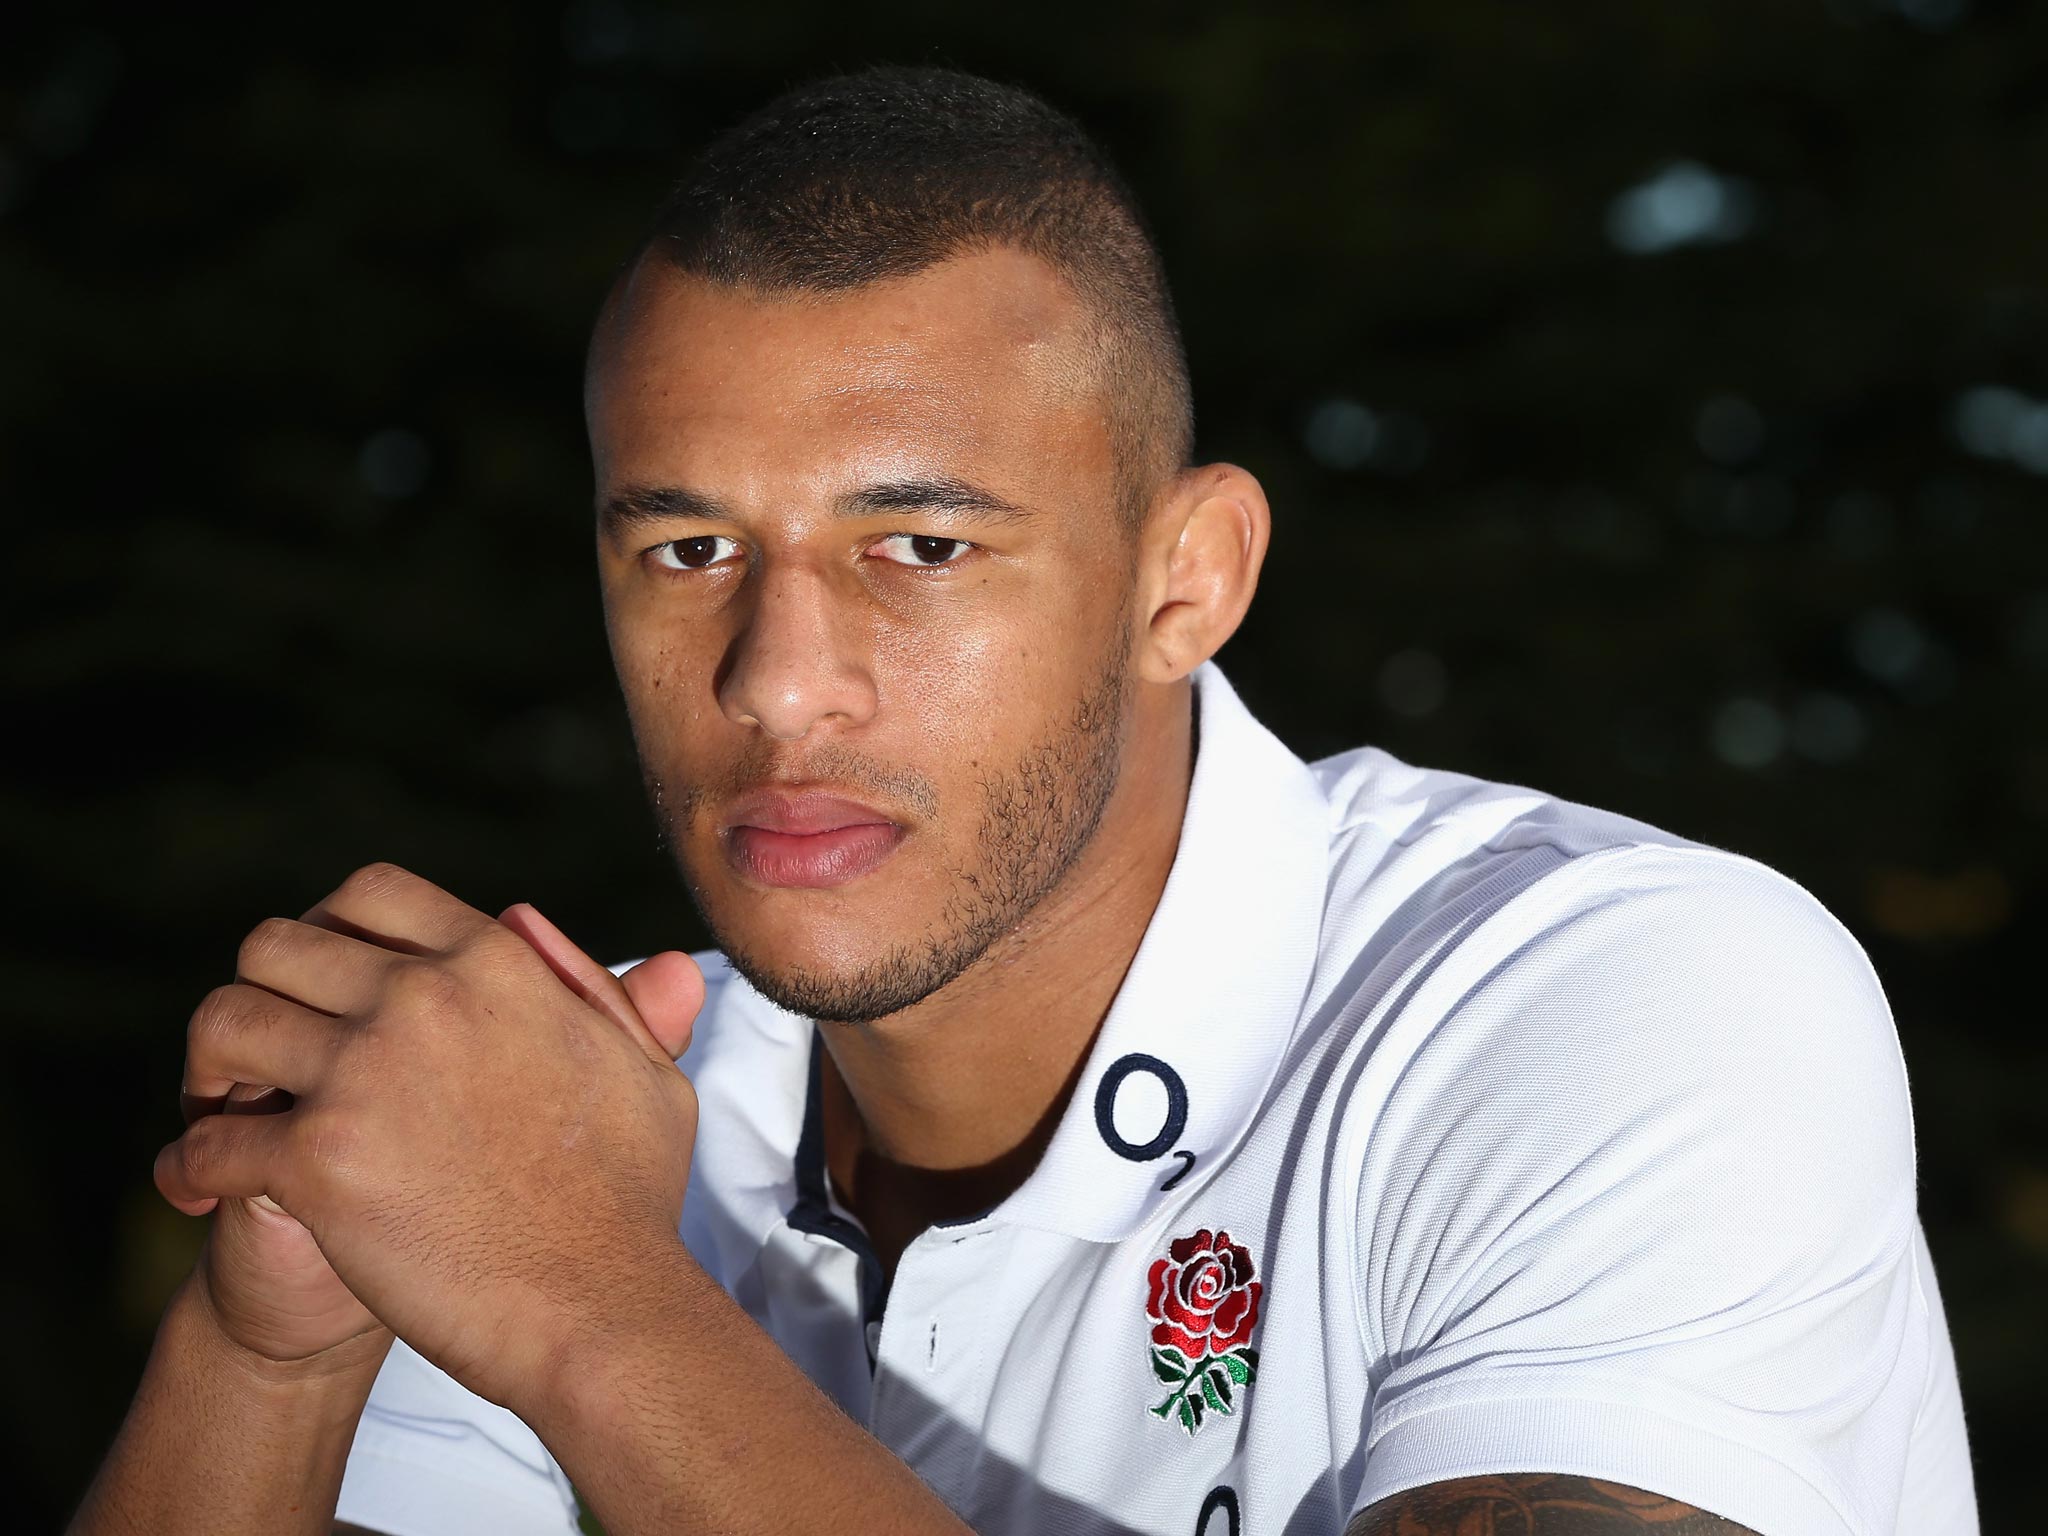 Courtney Lawes looks every inch the part in an England shirt